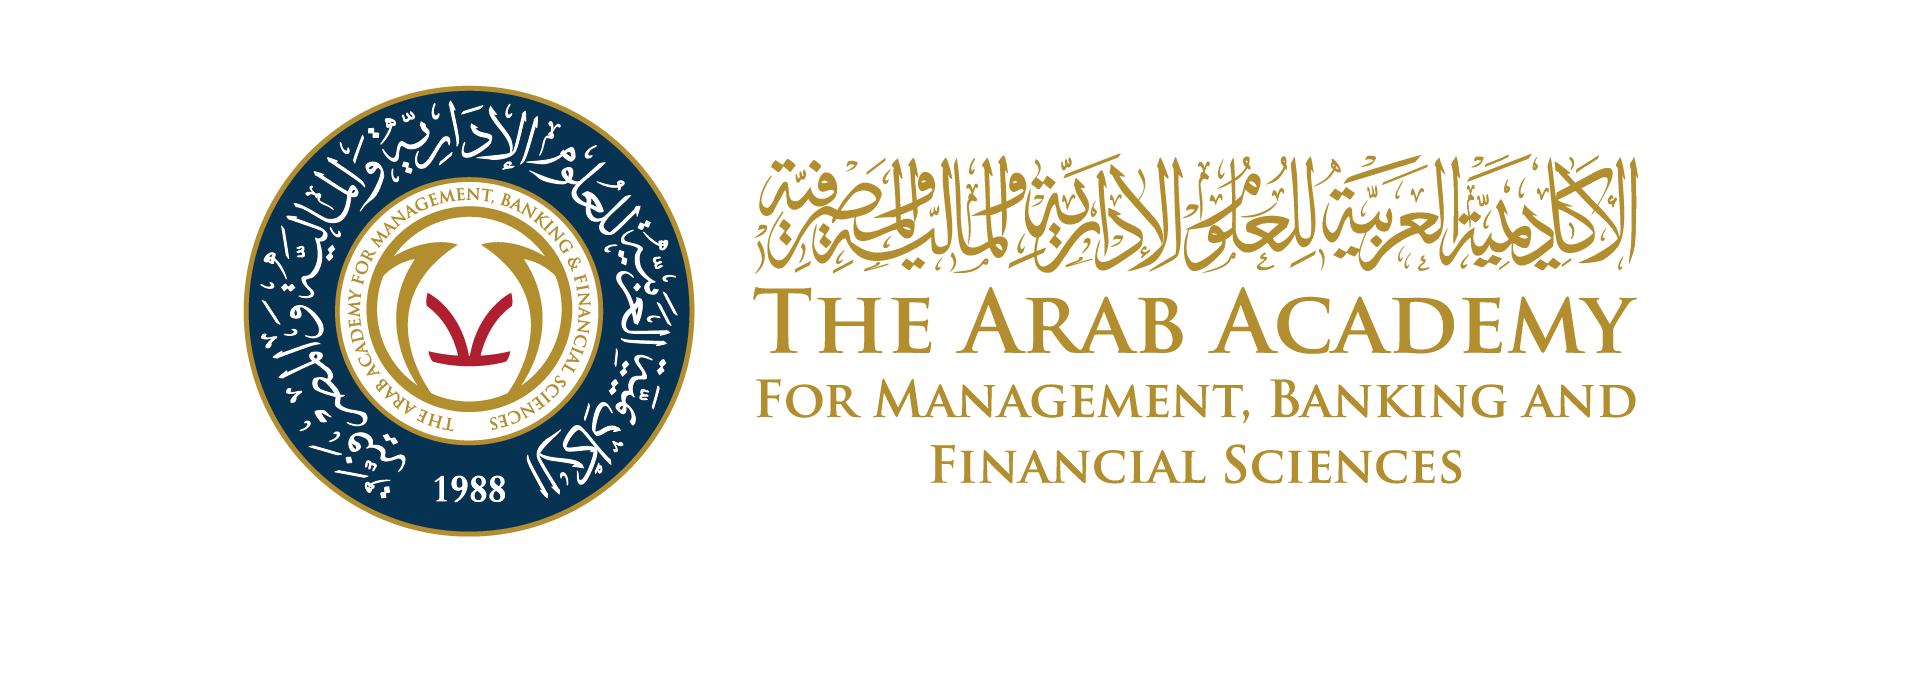 arab-academy-for-management-banking-and-financial-sciences